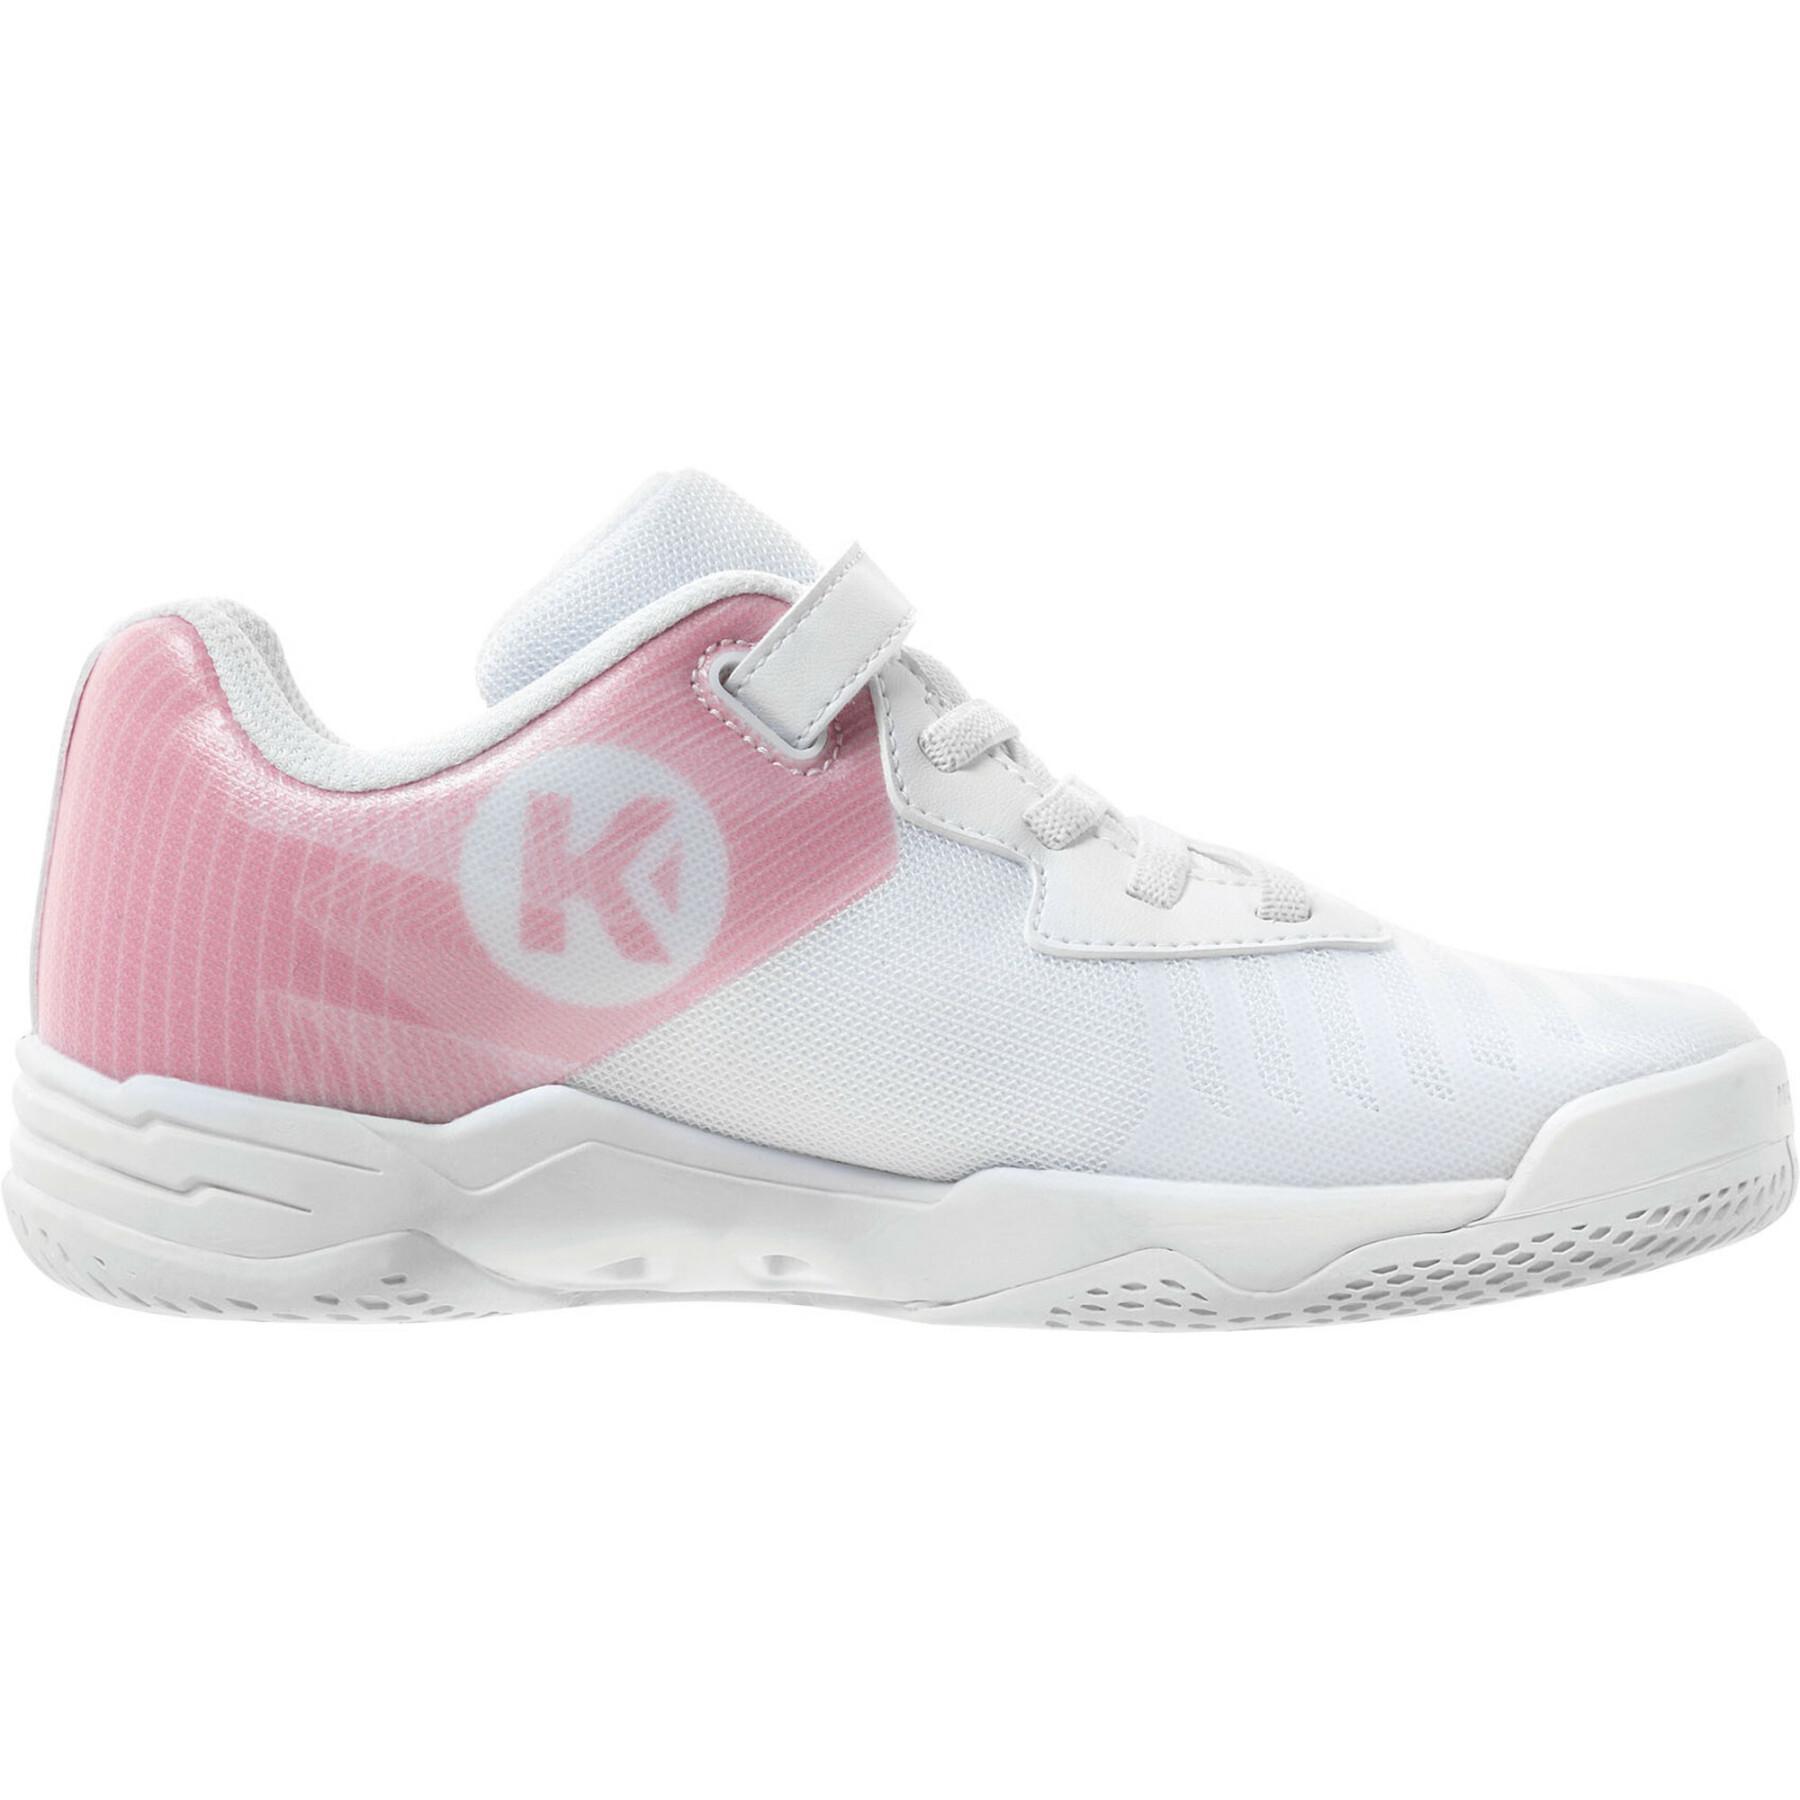 Indoor shoes for girls Kempa Wing 2.0